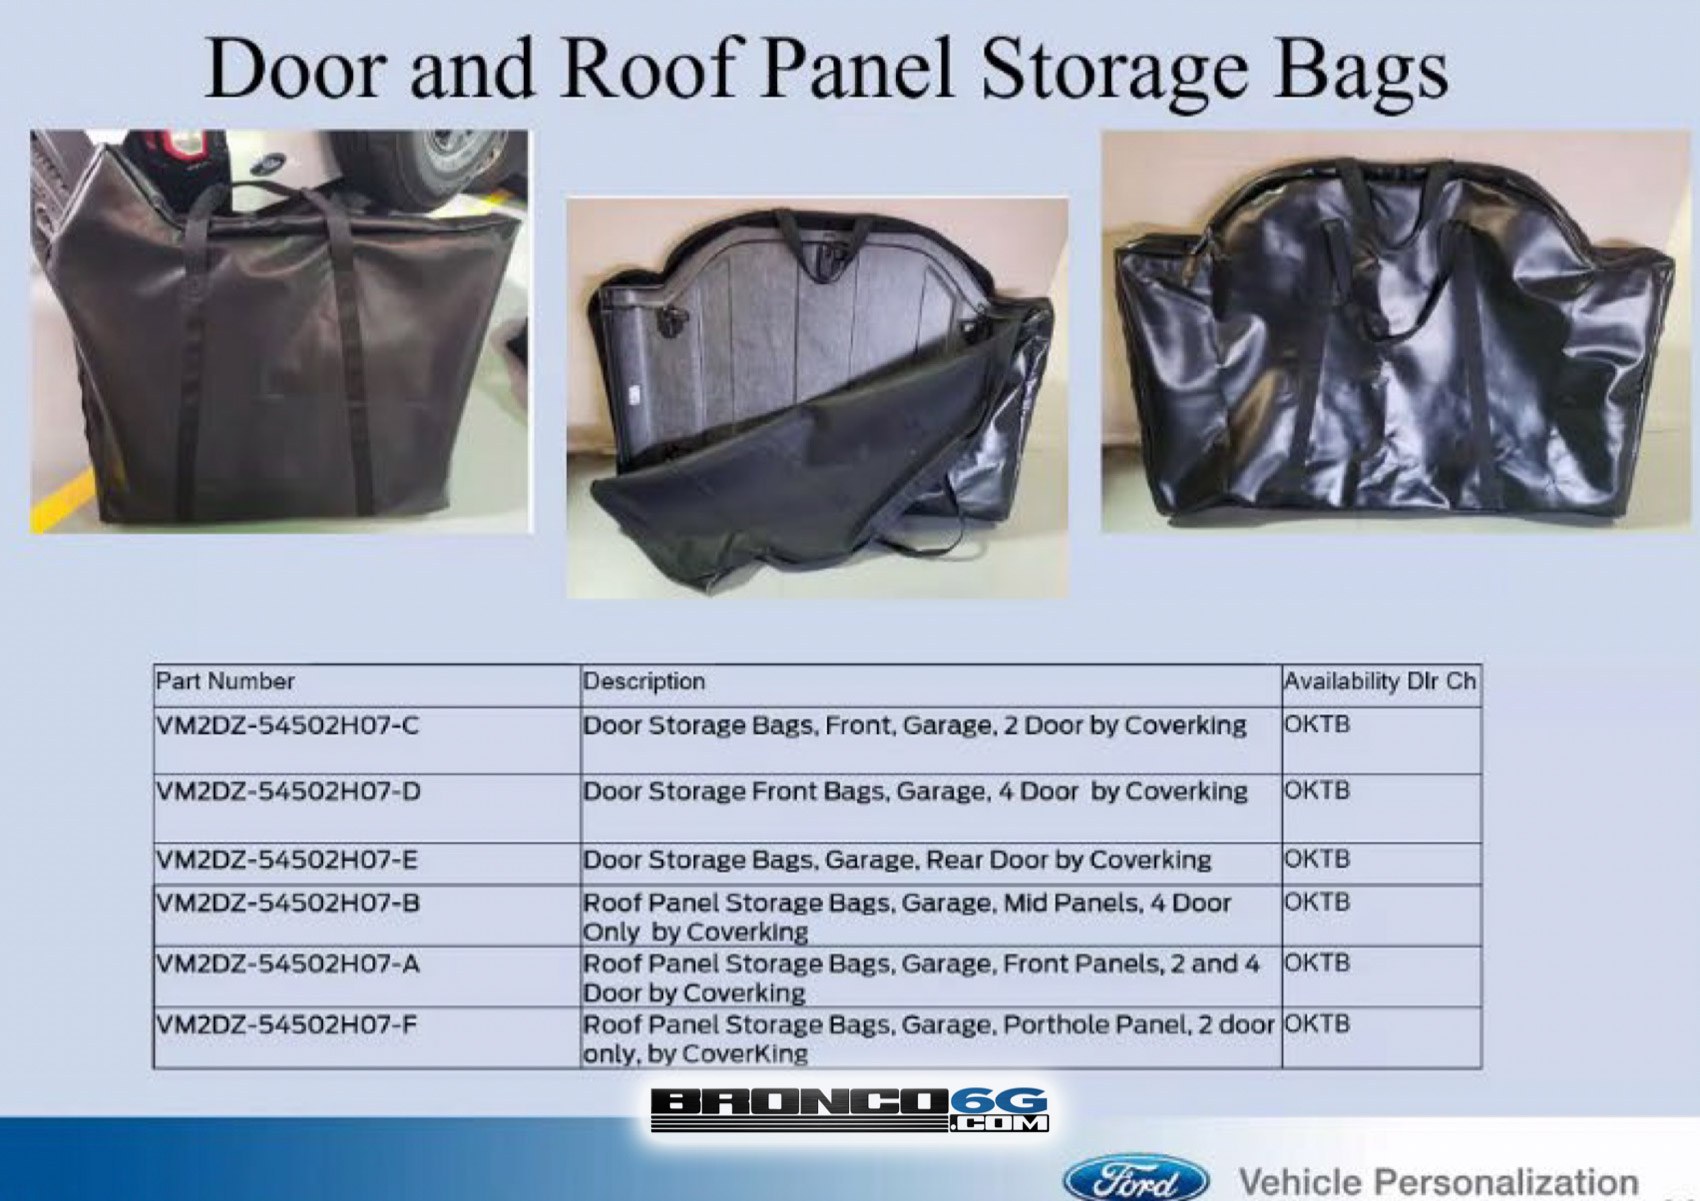 2021 Bronco Door and Roof Panel Storage Bags - Ford Performance OEM factory accessory.jpg